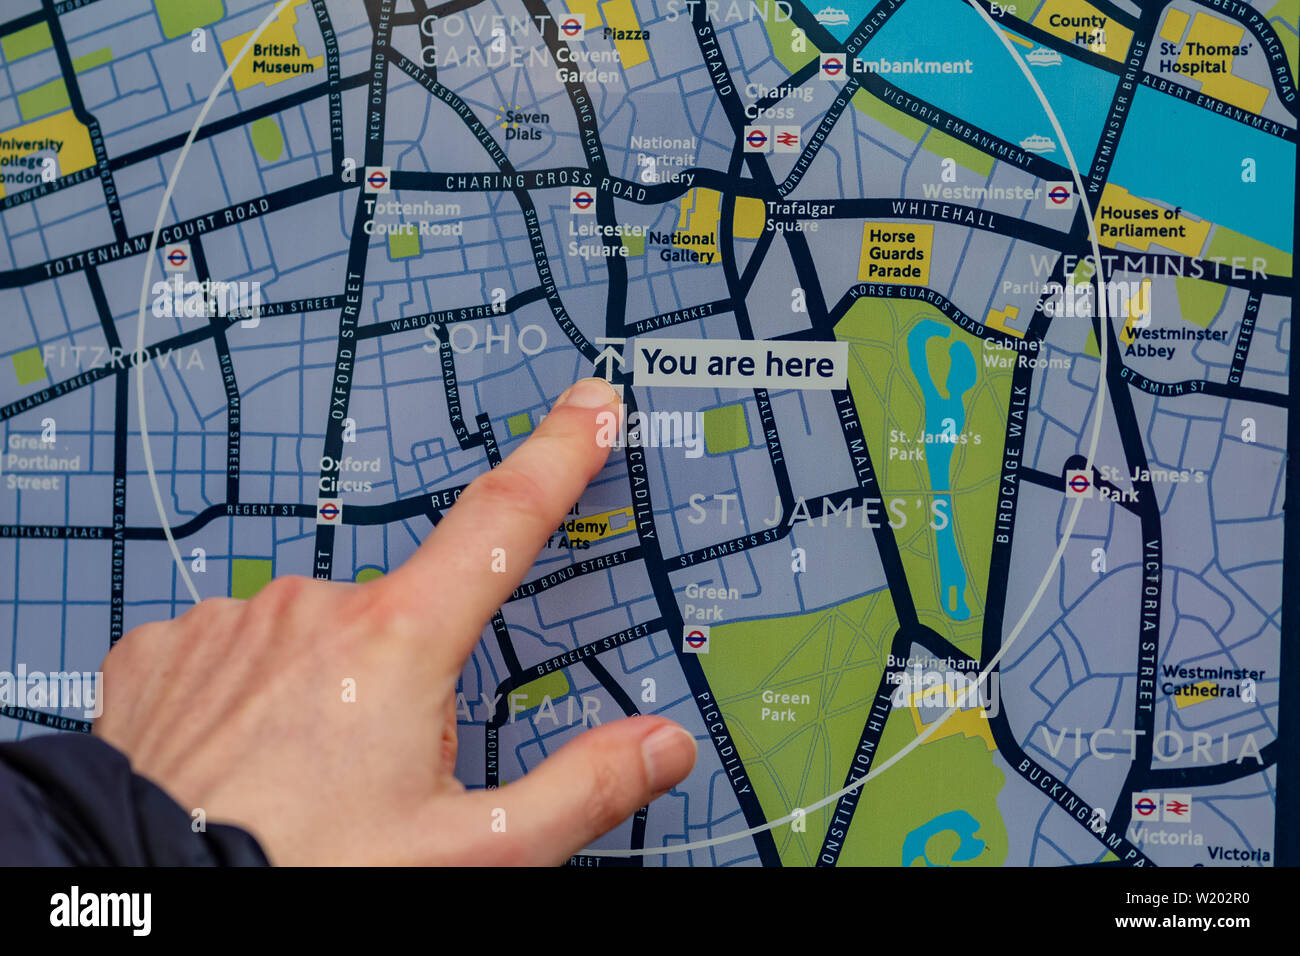 London, UK - 17, December 2018: The tourist looks at the map of London and shows by the finger where he is now. Stock Photo